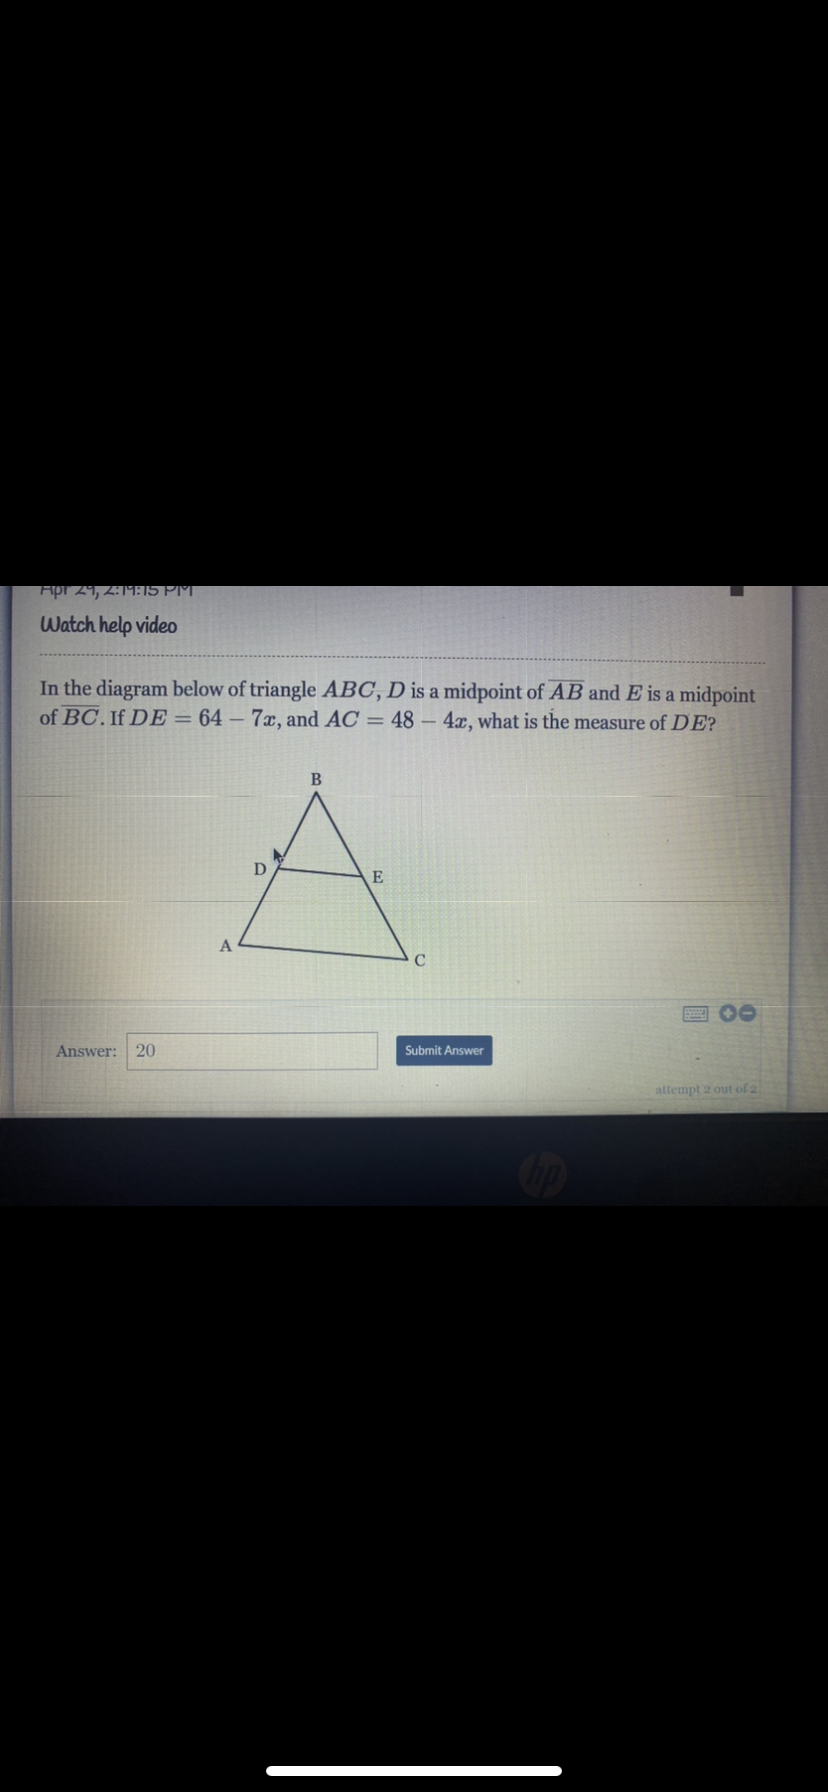 Apr 29, 2:19915 PM
Watch help video
In the diagram below of triangle ABC, D is a midpoint of AB and E is a midpoint
of BC. If DE = 64 – 7x, and AC = 48 - 4x, what is the measure of DE?
D
E
A
Answer: 20
Submit Answer
attempt 2 out of 2
